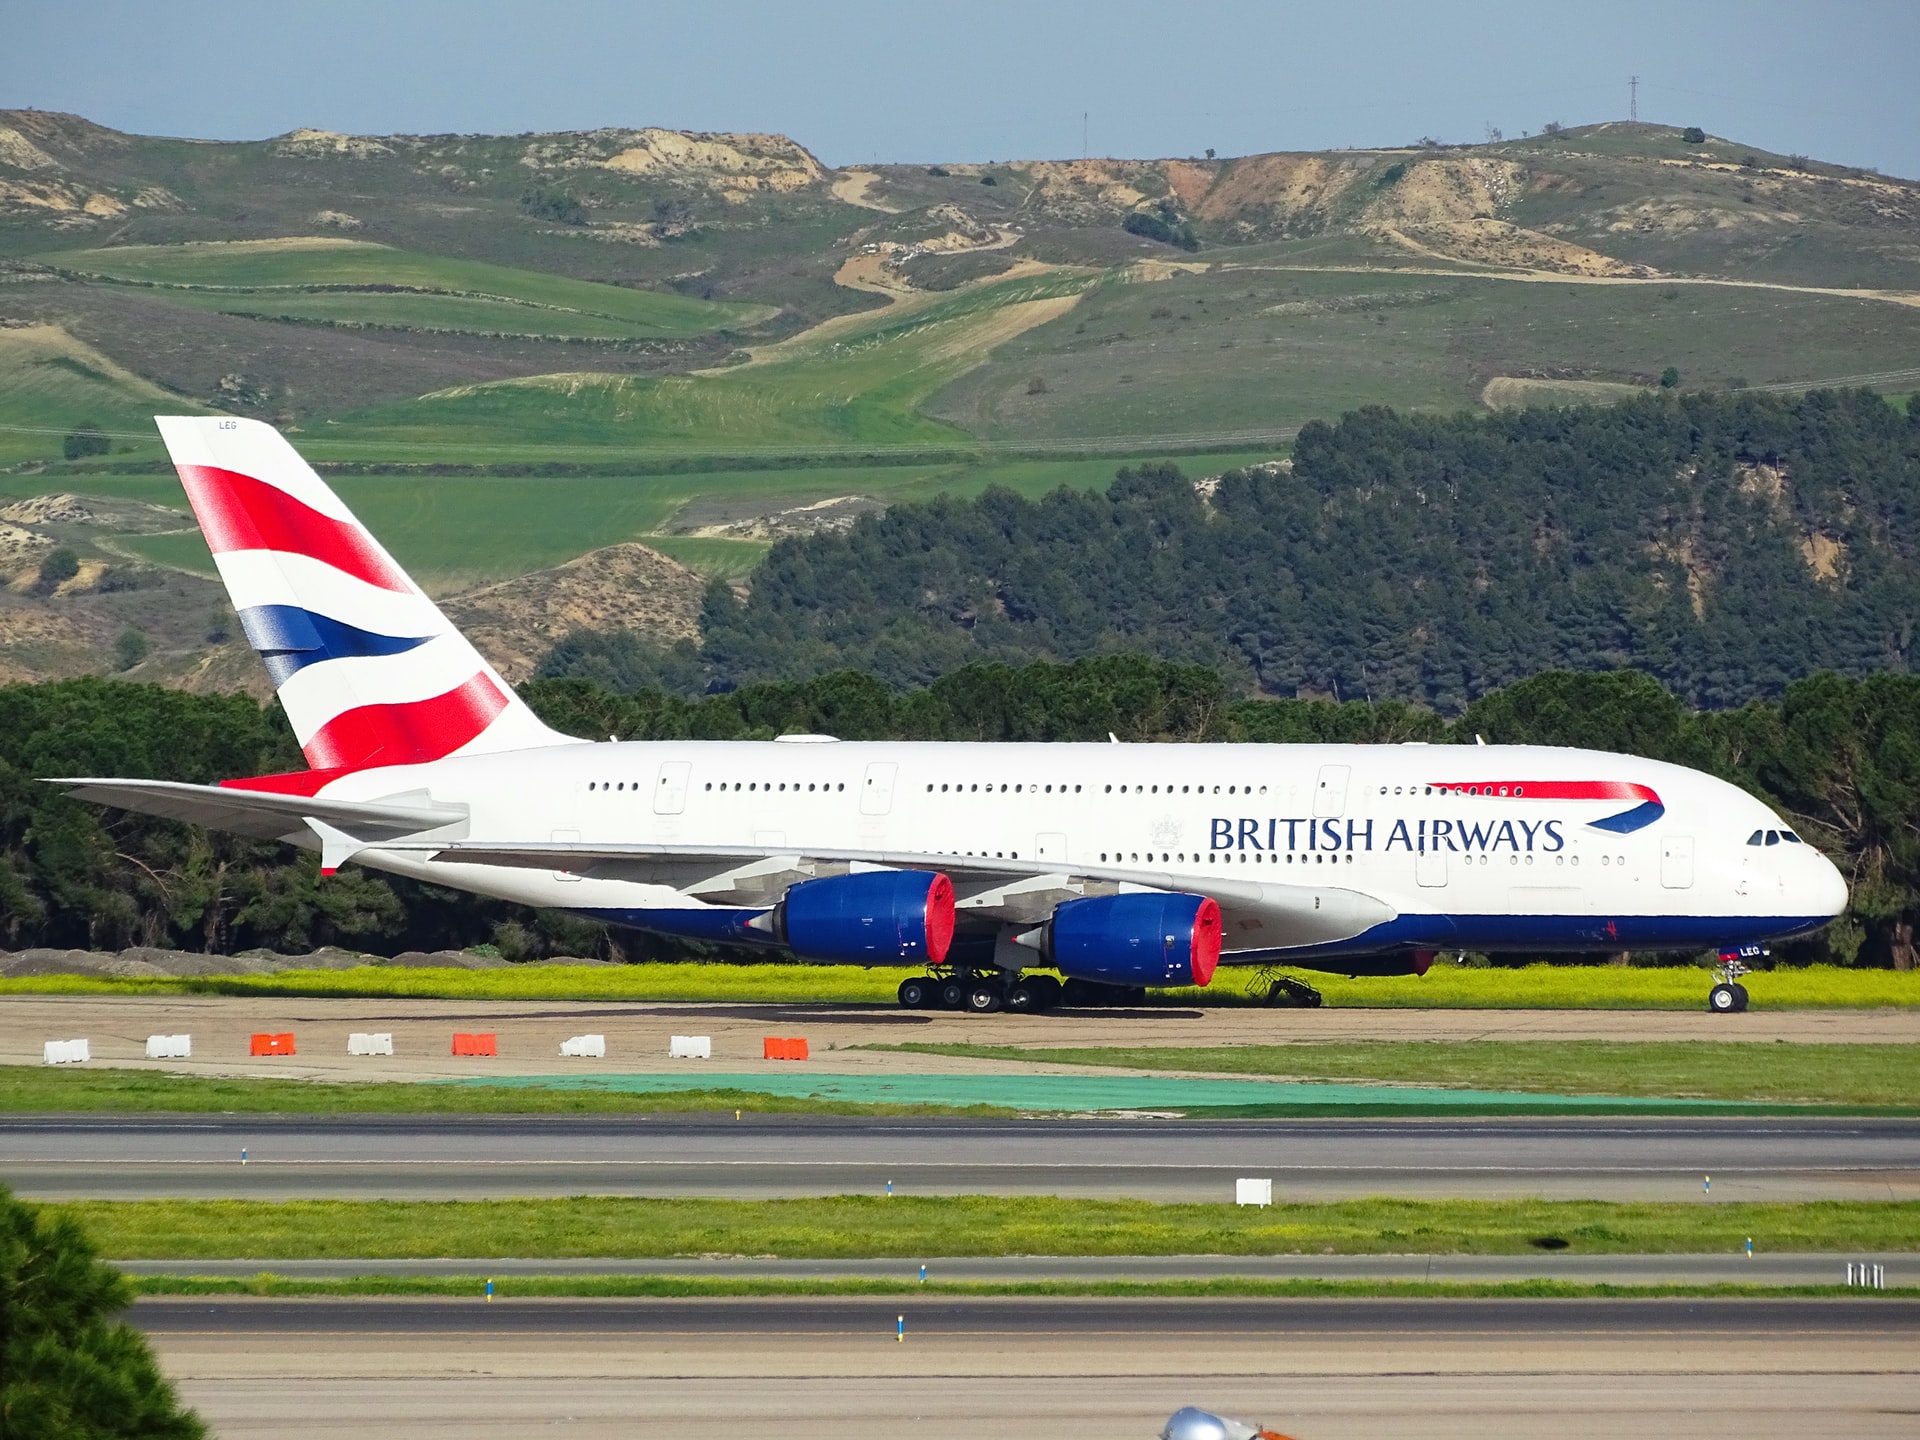 A British Airways aircraft on the runway.